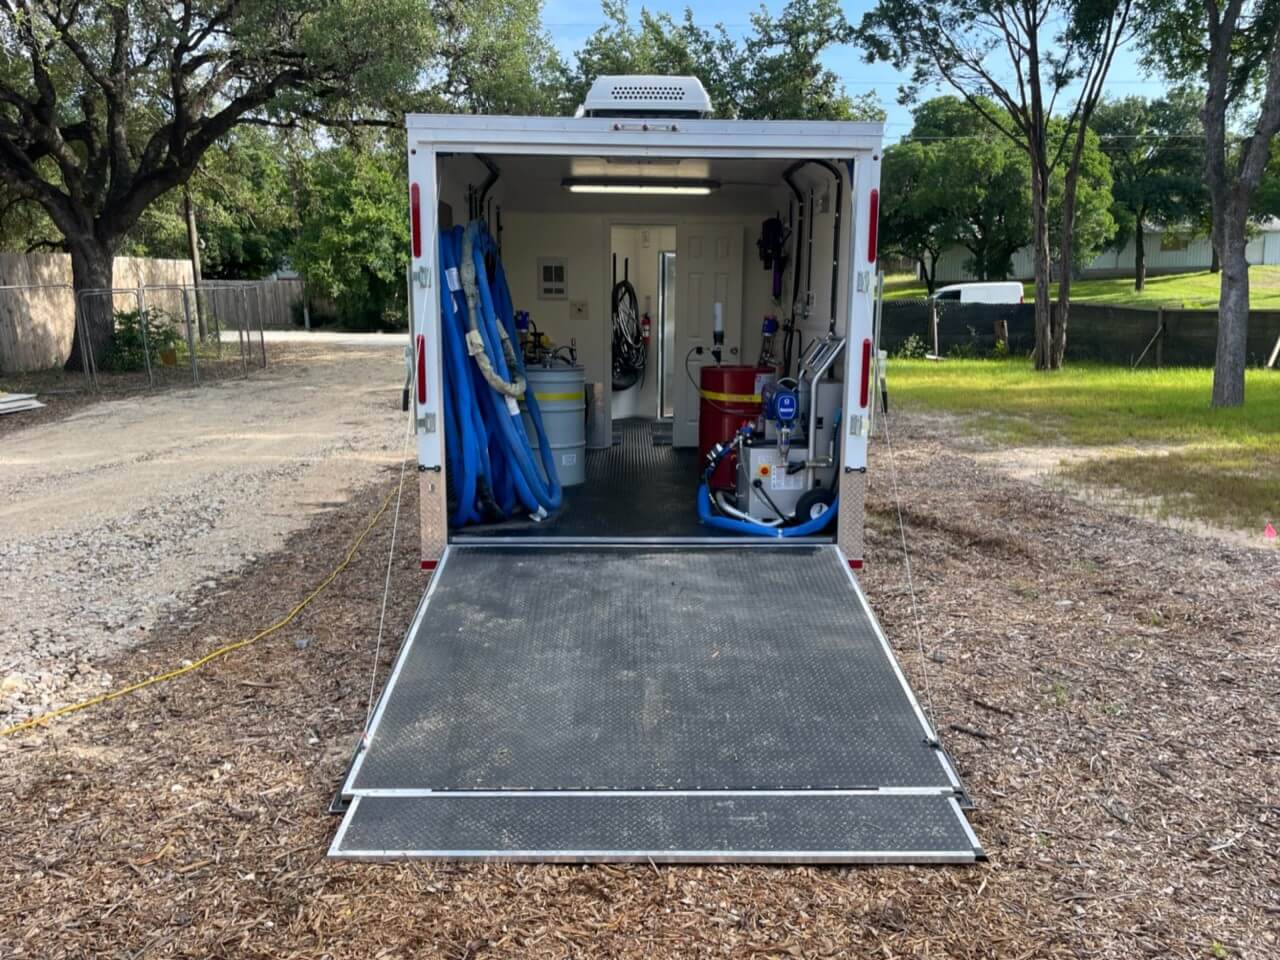 Front view of the Spray Foam Rig with the back door down showing the inside.